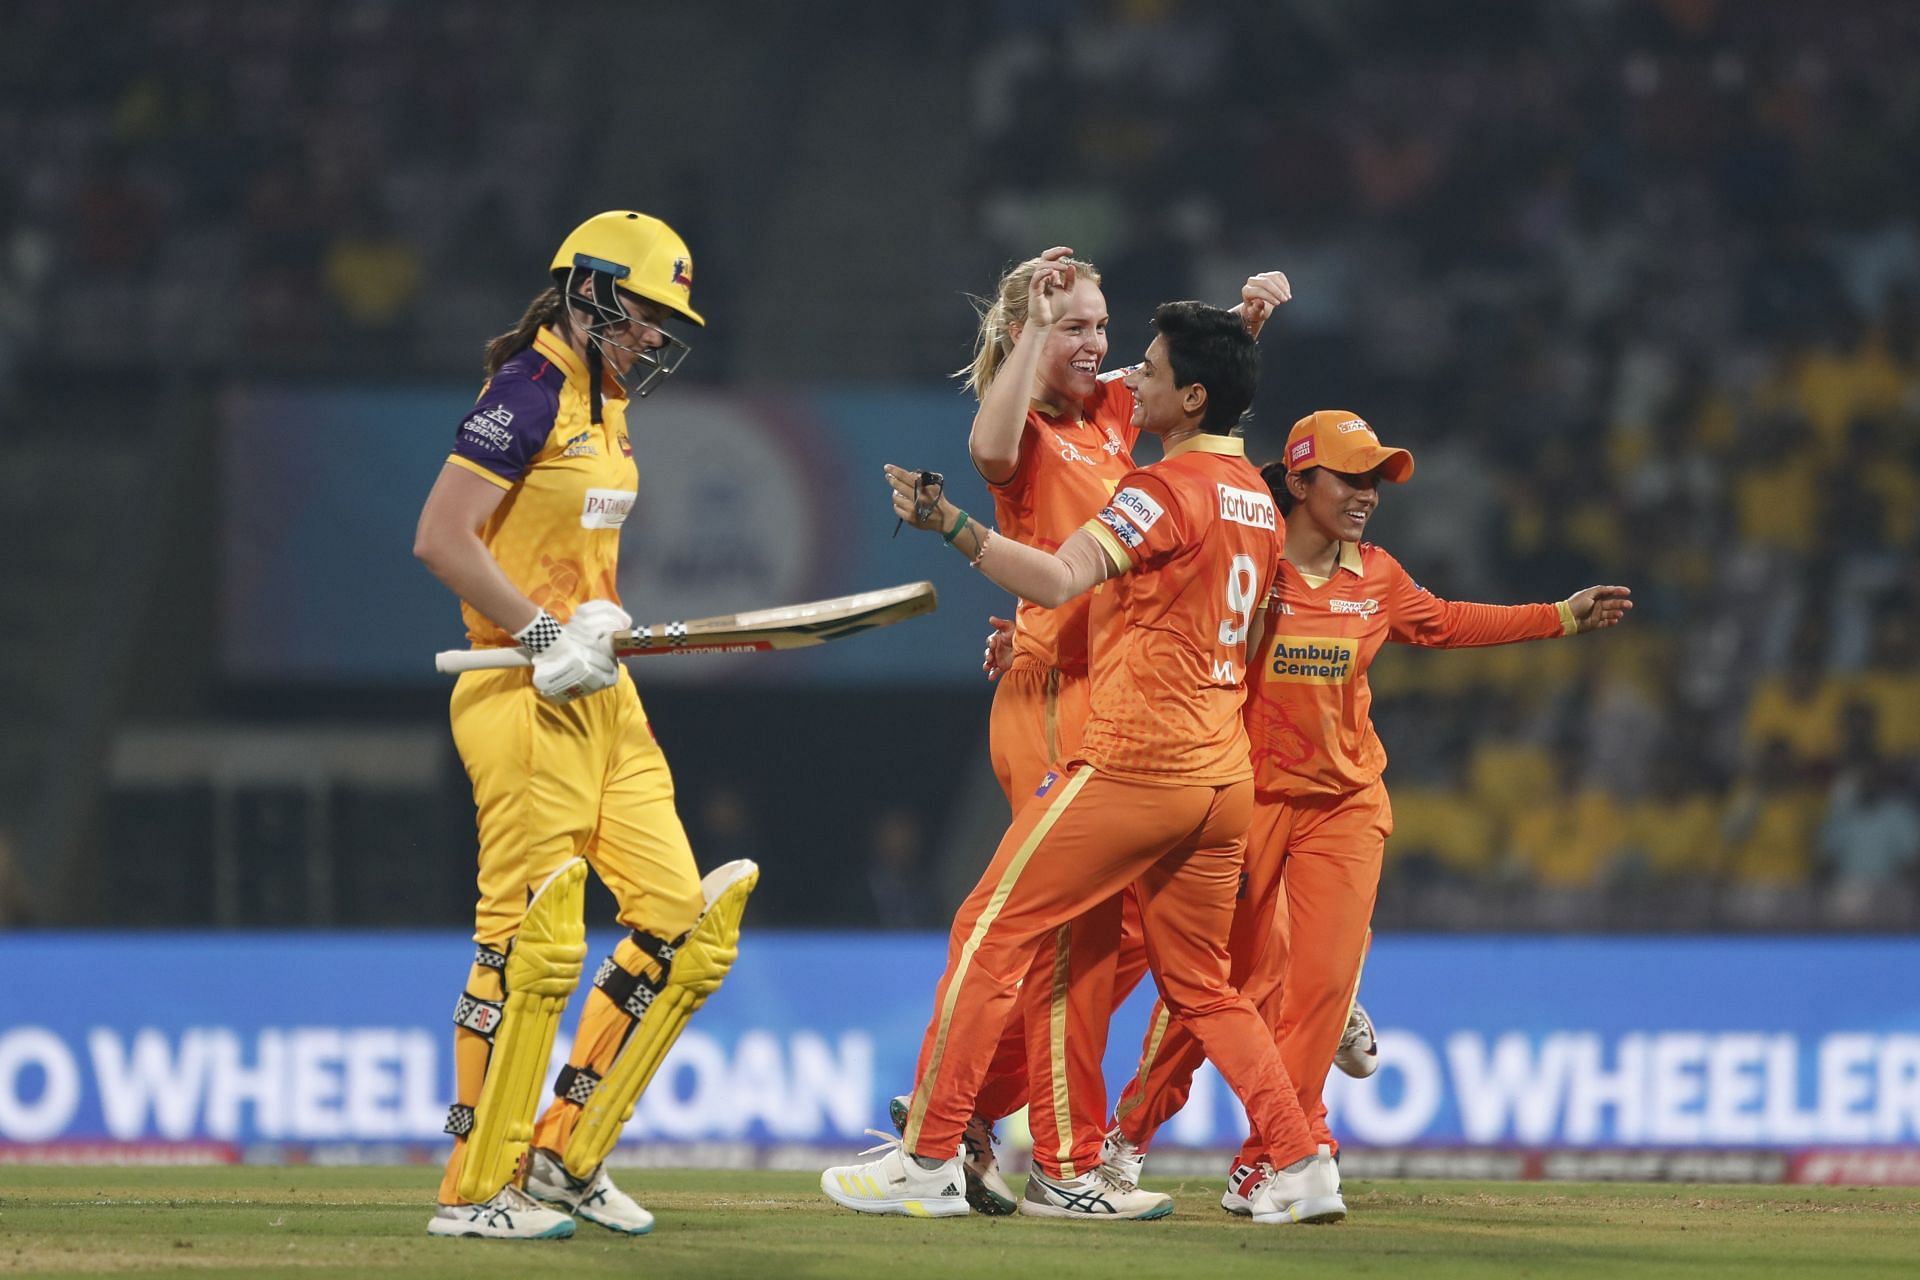 Tahlia McGrath walks off after being dismissed in a match against Gujarat Giants.